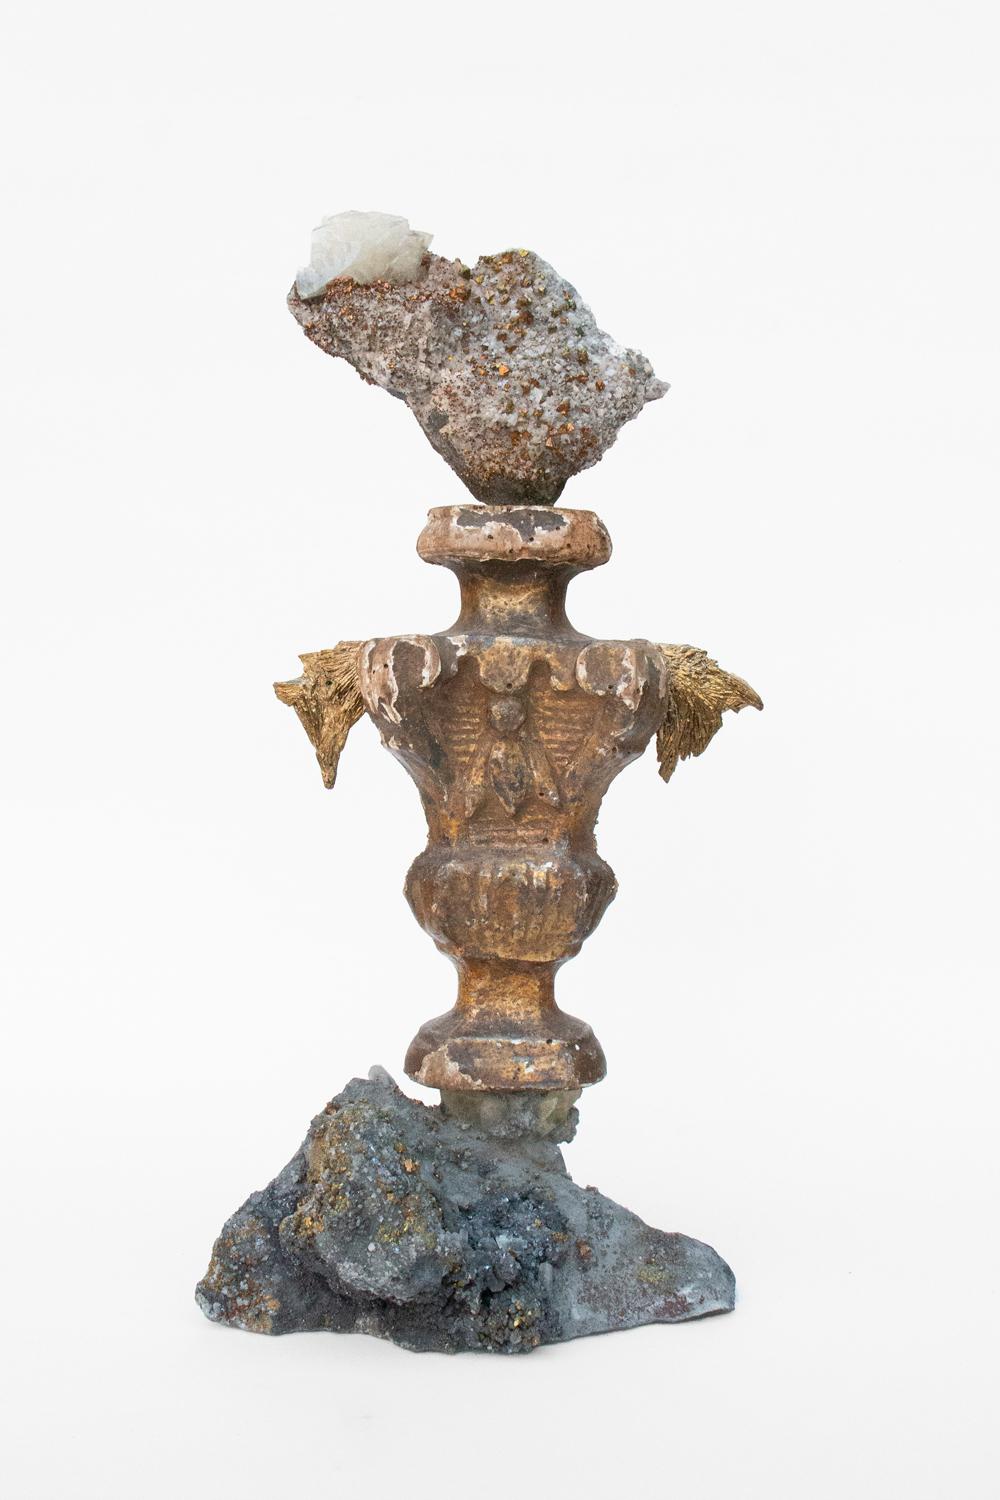 Sculptural 18th century Italian fragment with chalcopyrite on a druzy crystal matrix with calcite crystals and gold-plate kyanite.

This fragment was originally part of a candlestick from a church in Italy. It is distressed from time but still has